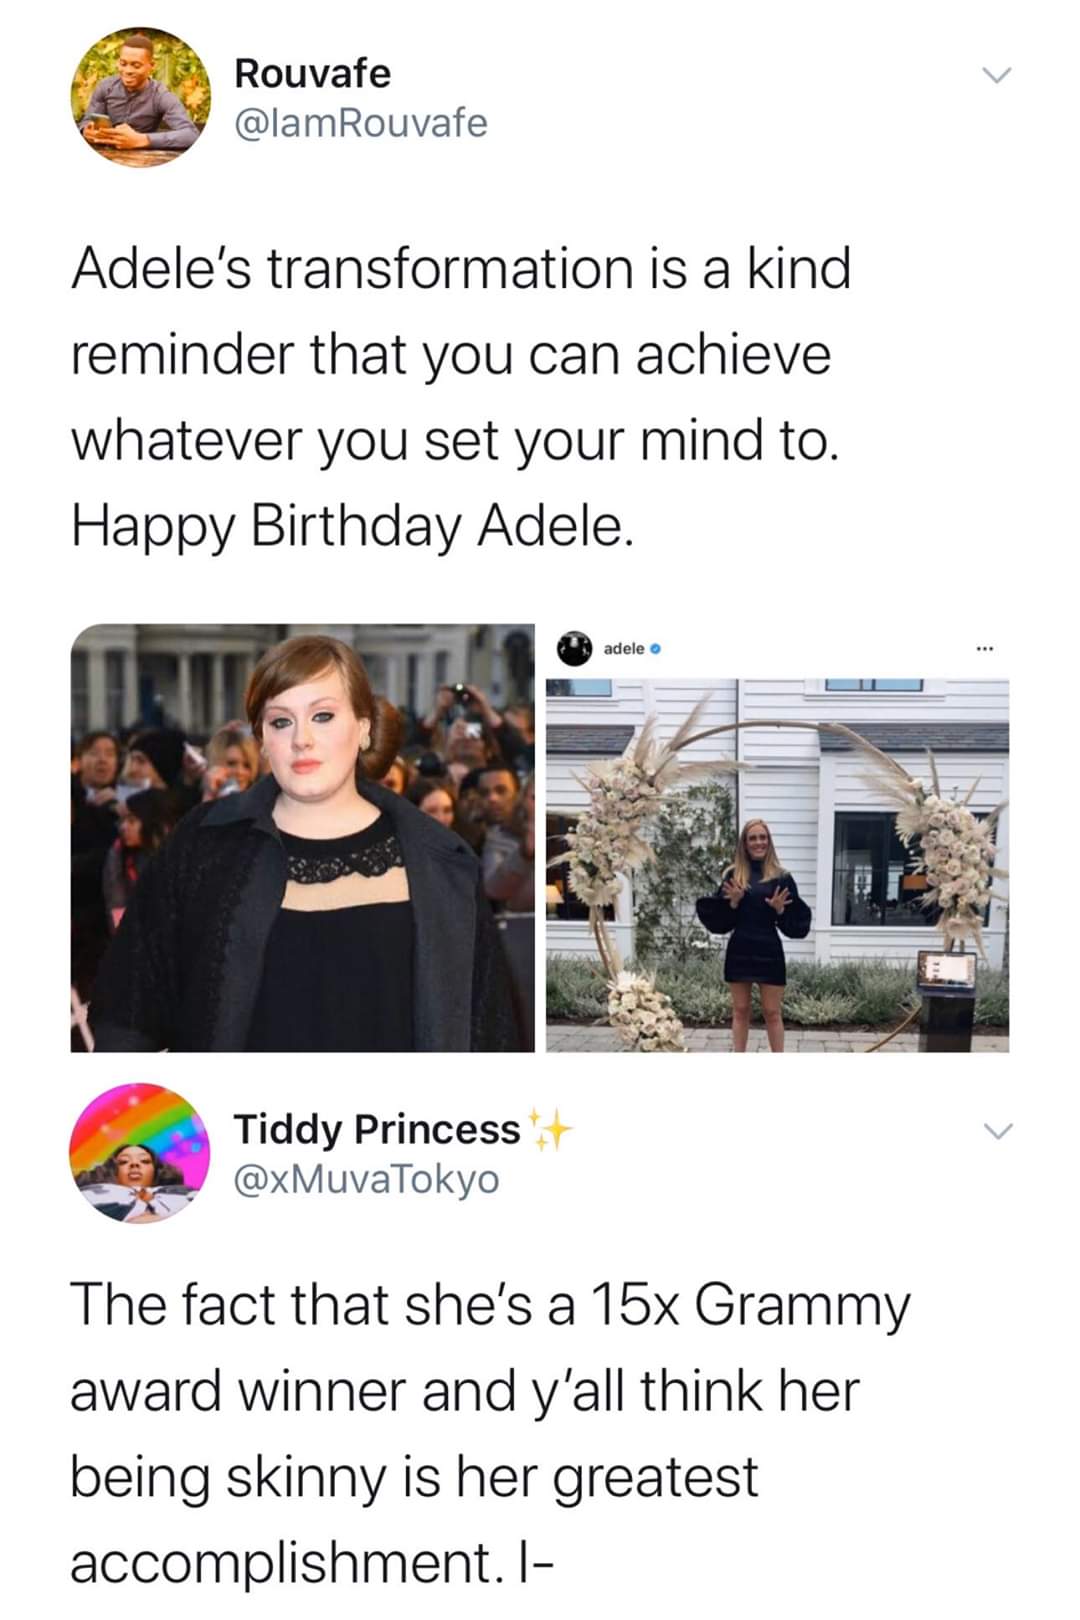 Women, Adele, Grammys, Jonah Hill, CICO feminine memes Women, Adele, Grammys, Jonah Hill, CICO text: Rouvafe @lamRouvafe Adelels transformation is a kind reminder that you can achieve whatever you set your mind to. Happy Birthday Adele. Tiddy Princess @xMuvaTokyo The fact that she's a 15x Grammy award winner and y'all think her being skinny is her greatest accomplishment. l- 